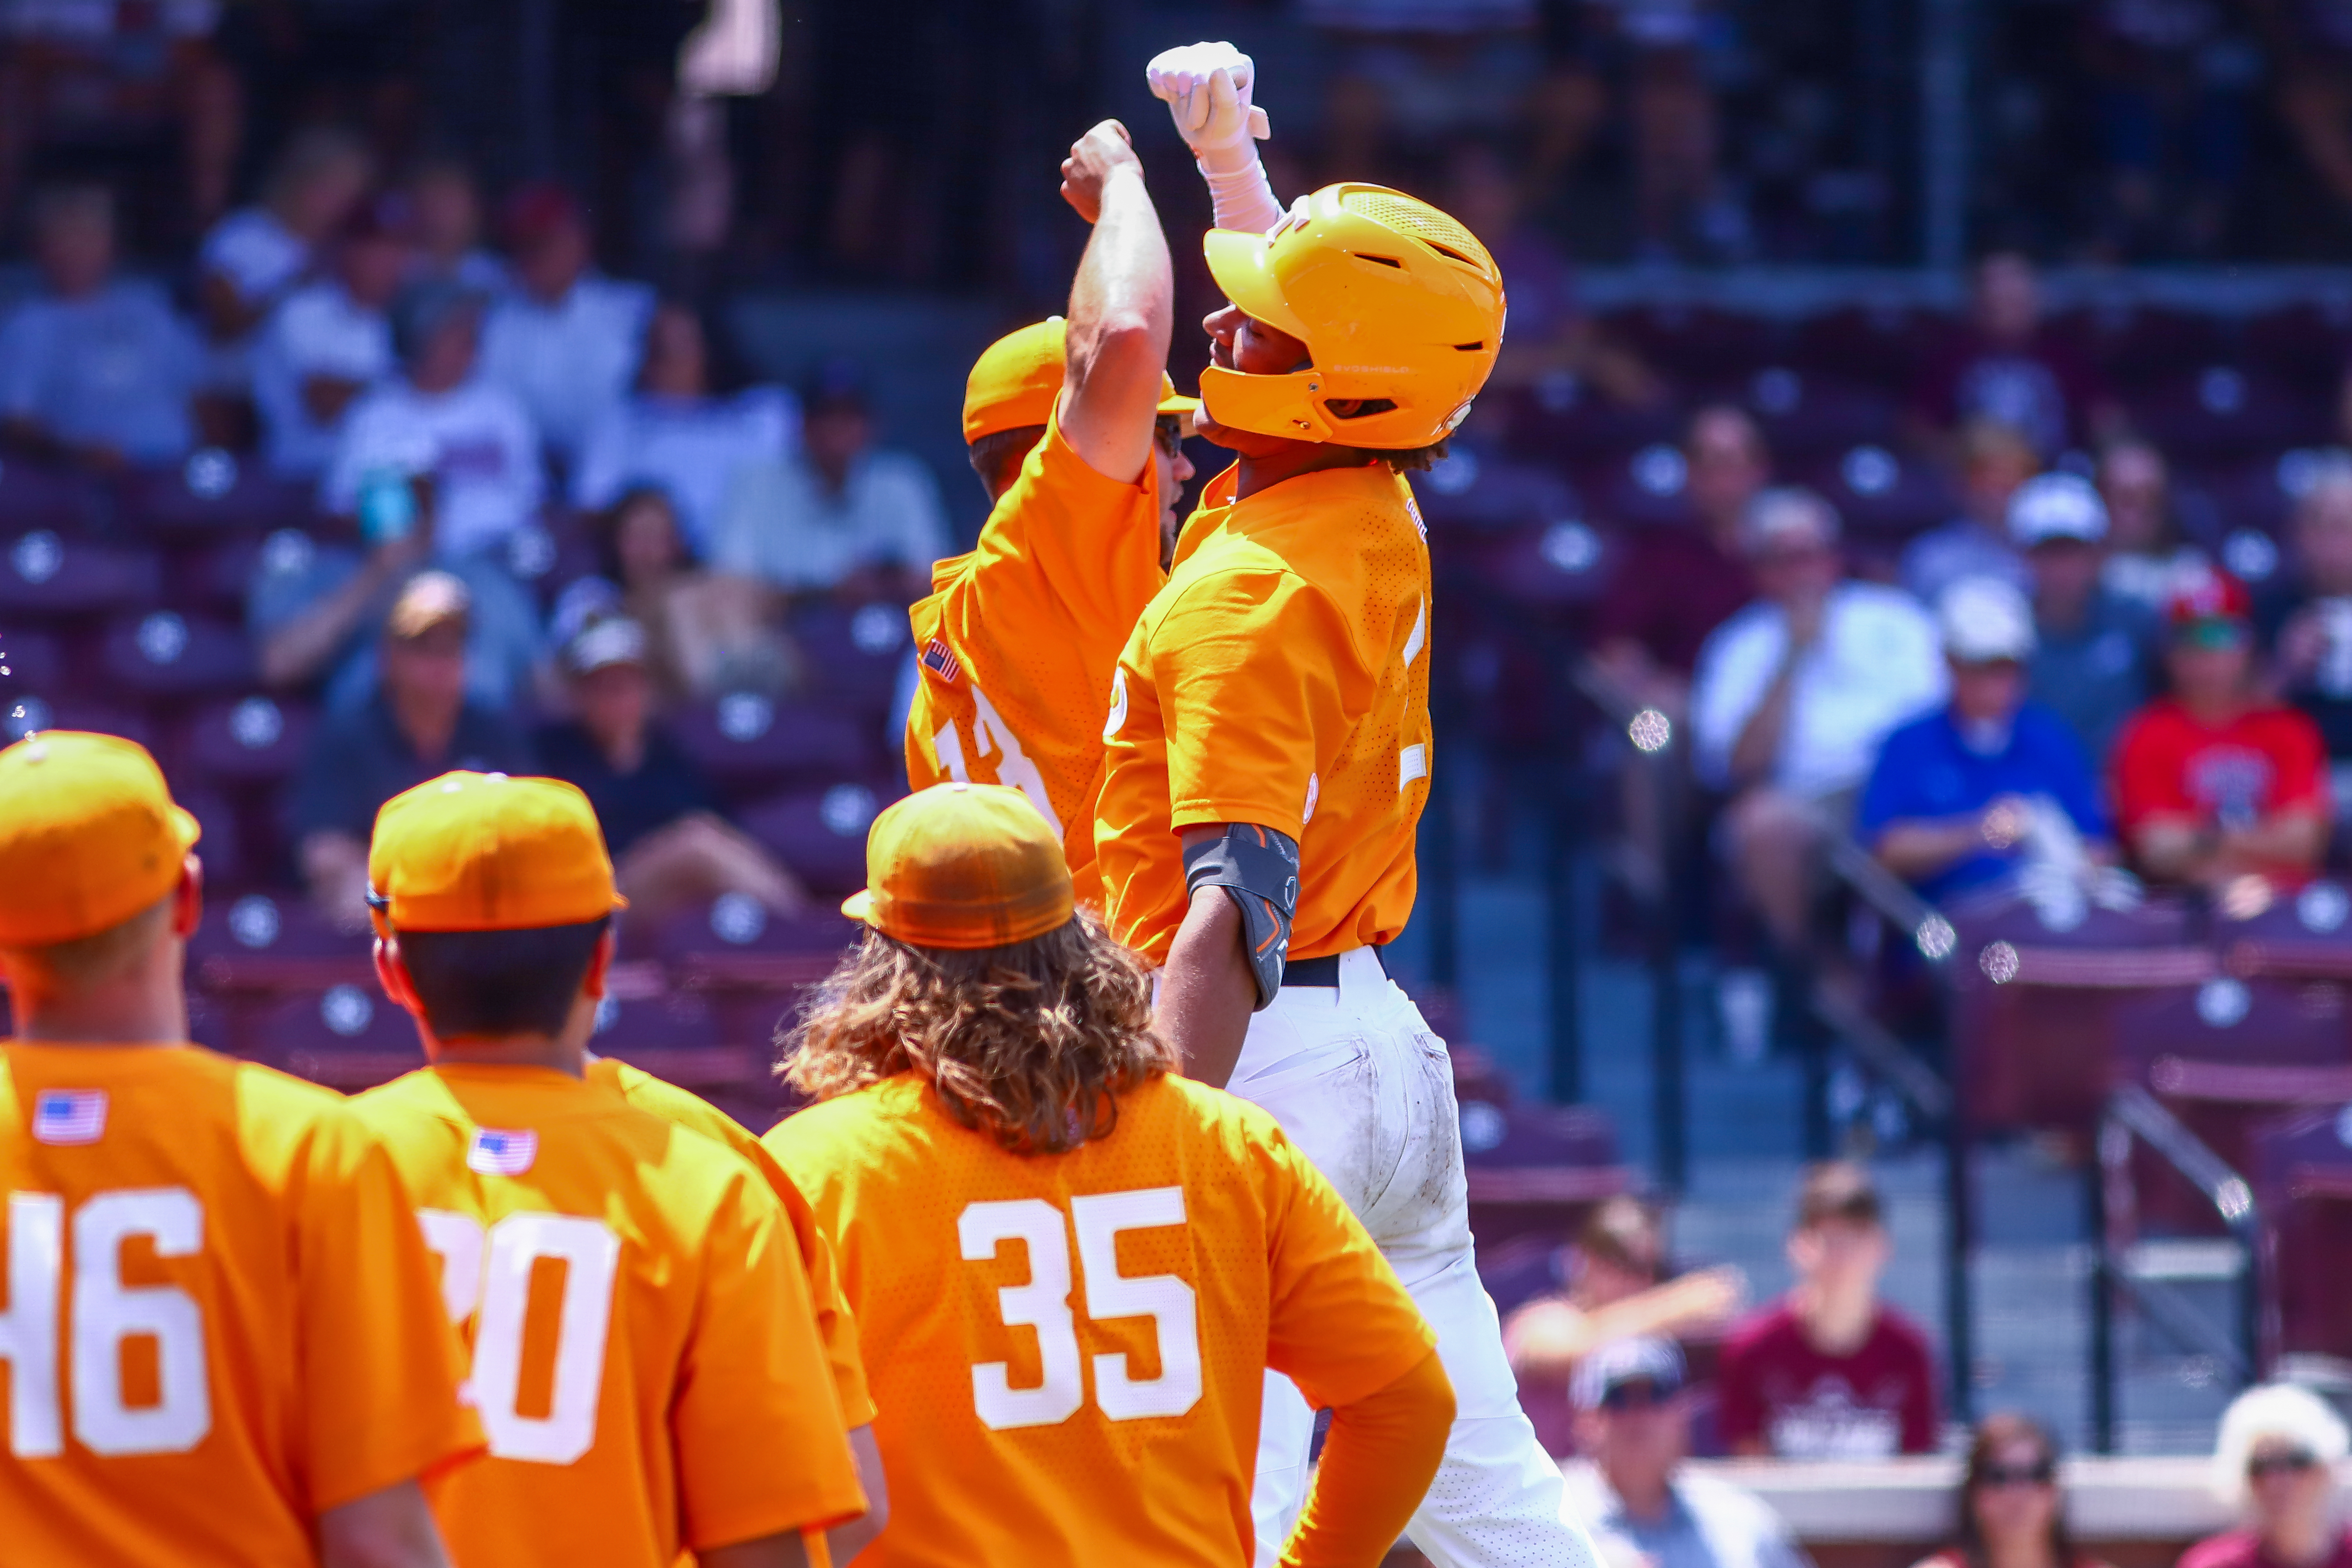 SEC Baseball Tournament 2022: Tuesday Scores, Updated Bracket and Schedule, News, Scores, Highlights, Stats, and Rumors